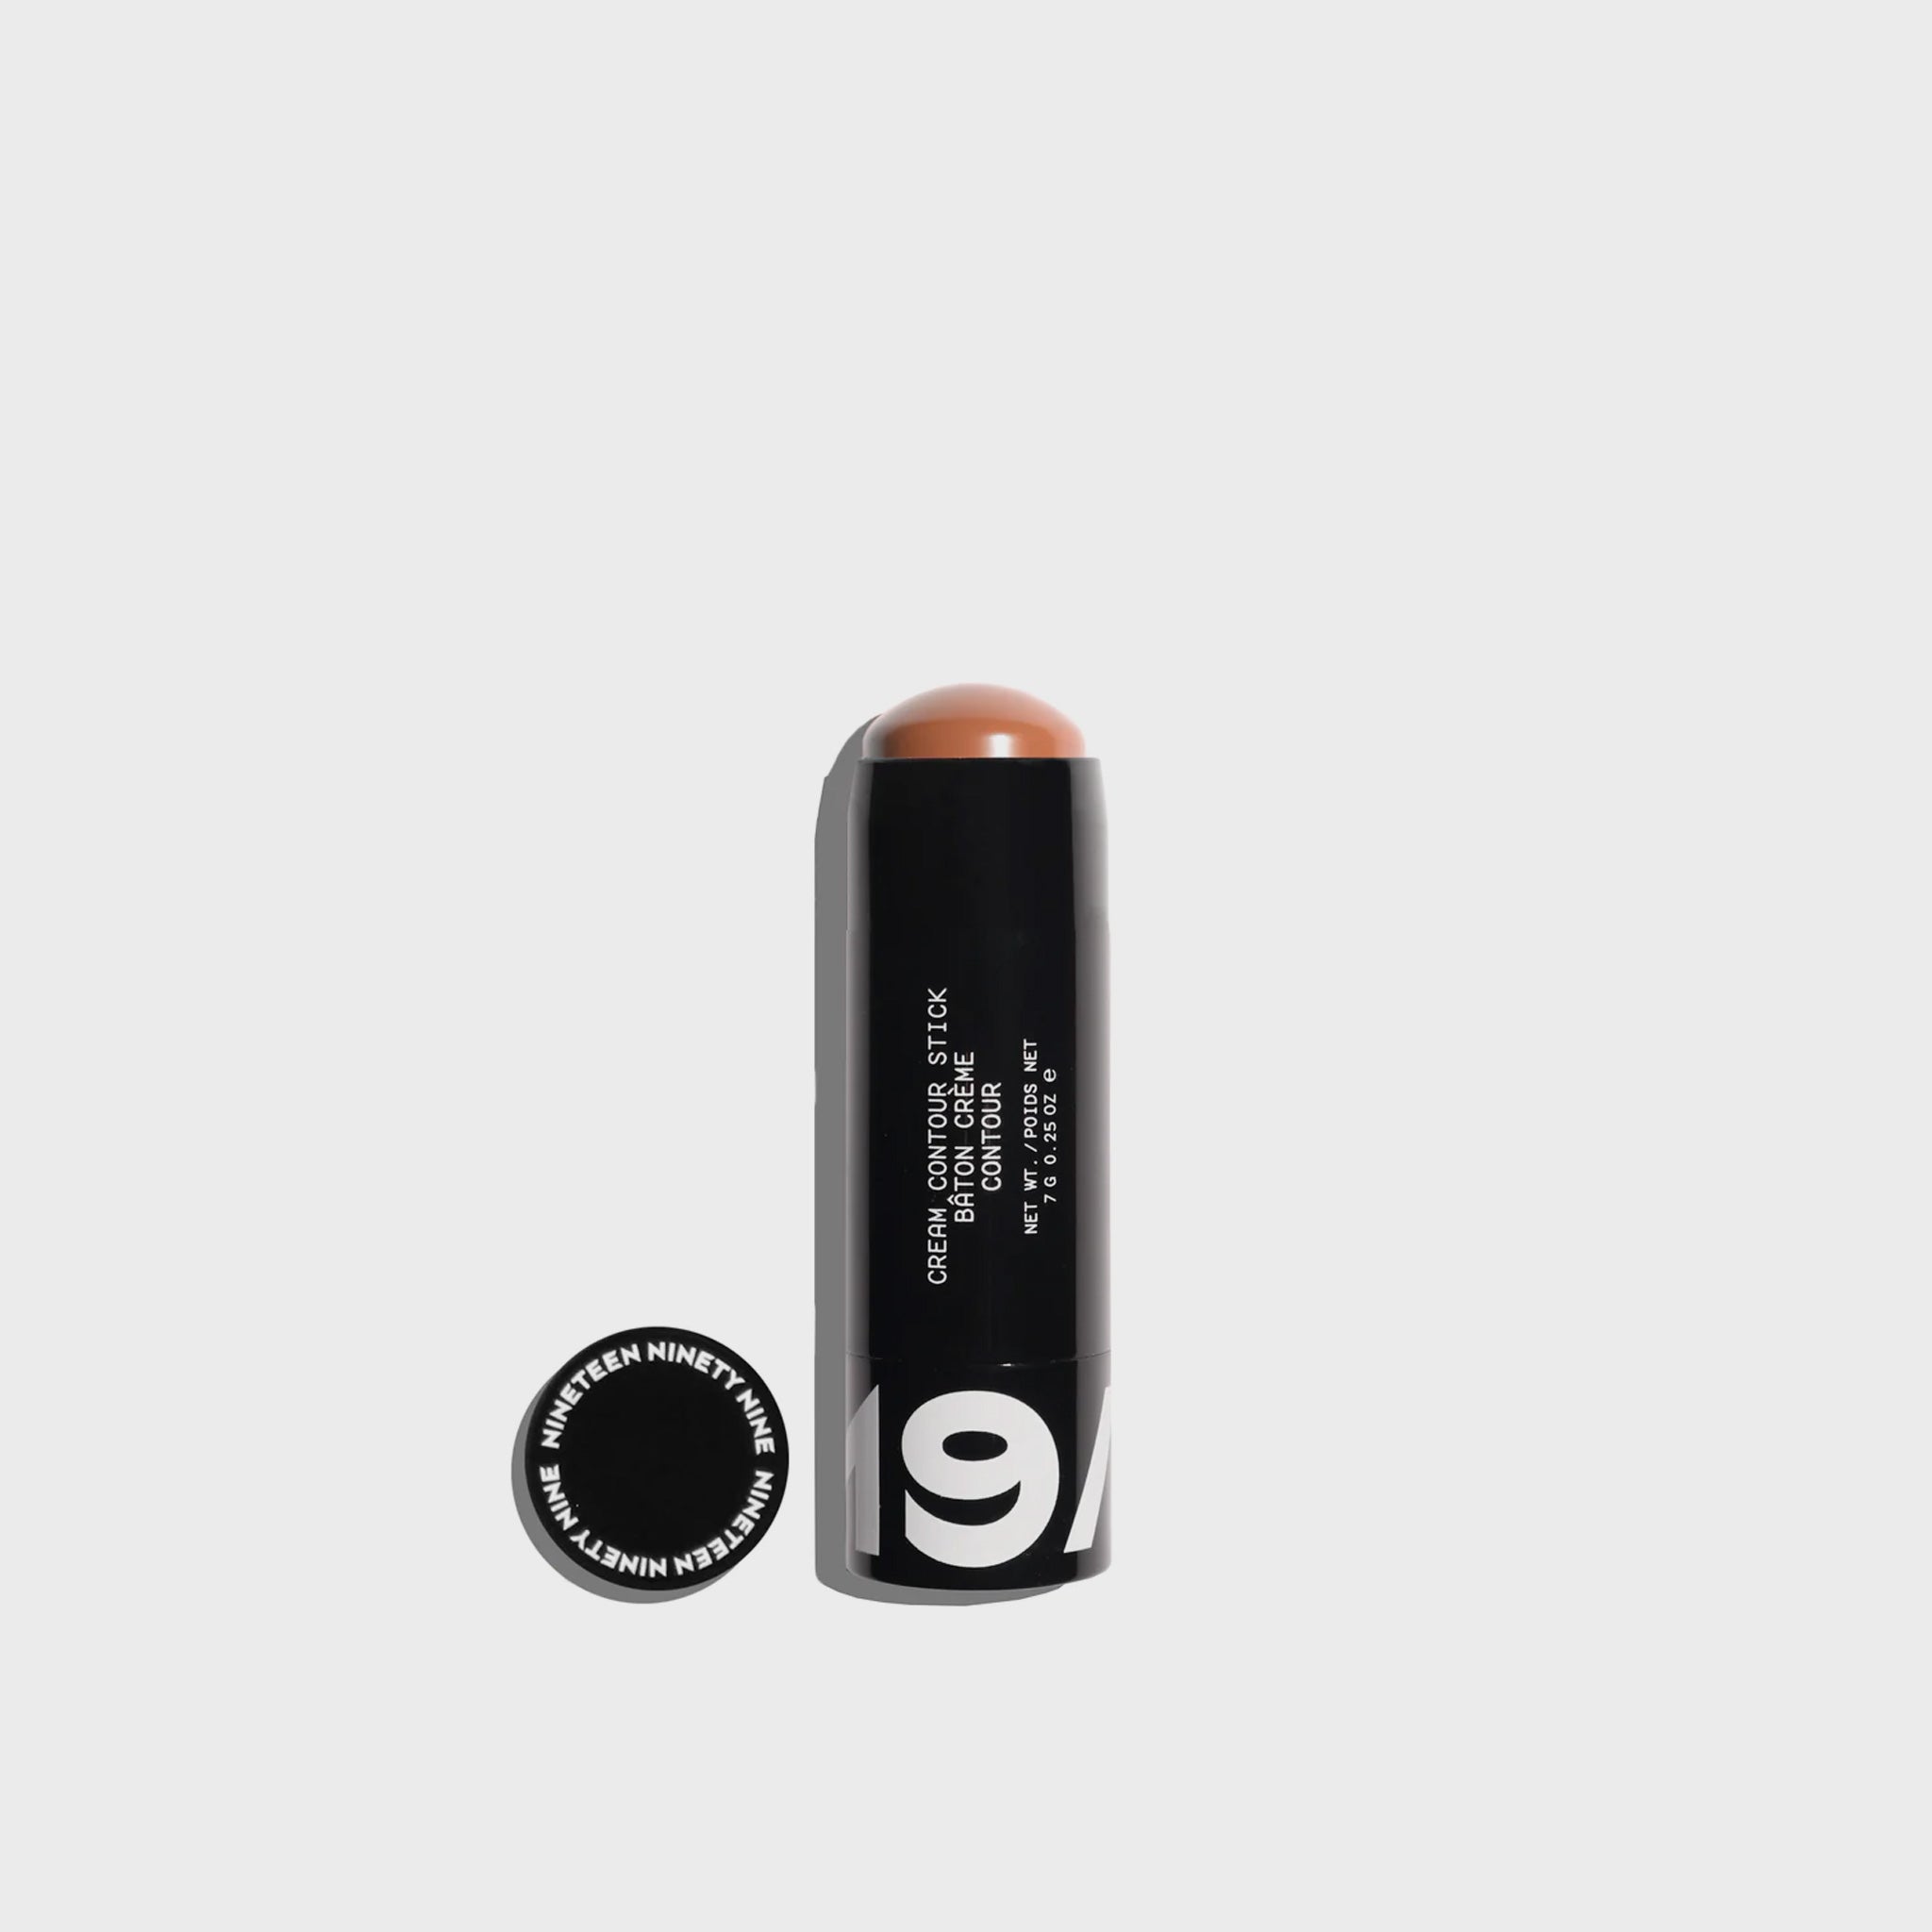 A small black makeup stick with bold 19/99 logo printed on black packaging showing the medium hued brown contouring makeup.